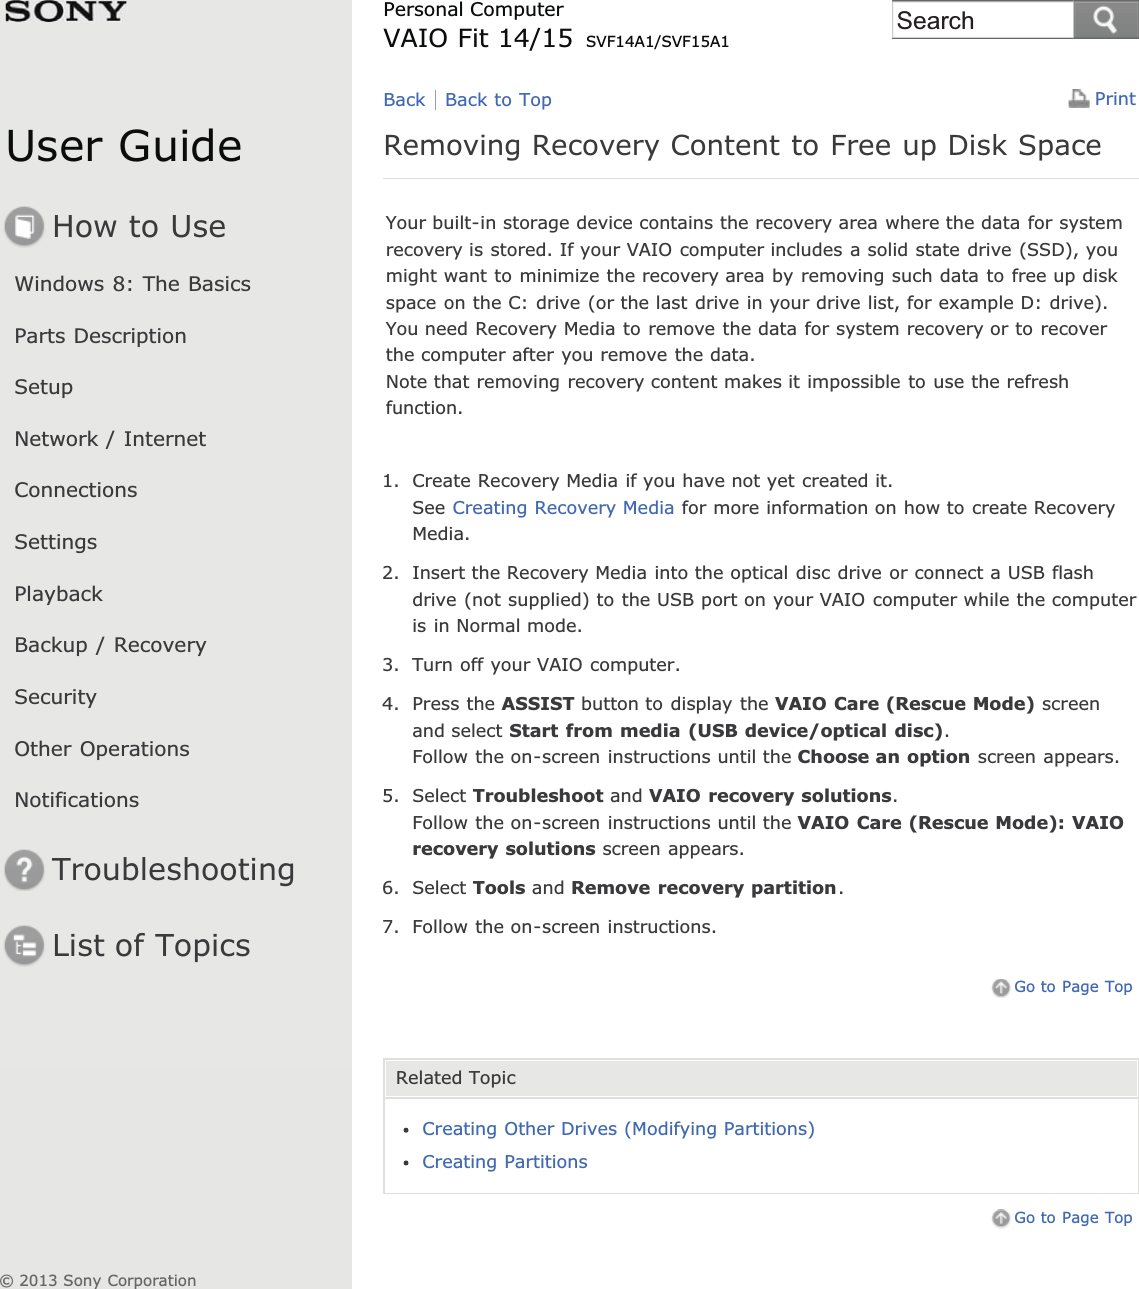 User GuideHow to UseWindows 8: The BasicsParts DescriptionSetupNetwork / InternetConnectionsSettingsPlaybackBackup / RecoverySecurityOther OperationsNotificationsTroubleshootingList of TopicsPrintPersonal ComputerVAIO Fit 14/15 SVF14A1/SVF15A1Removing Recovery Content to Free up Disk SpaceYour built-in storage device contains the recovery area where the data for systemrecovery is stored. If your VAIO computer includes a solid state drive (SSD), youmight want to minimize the recovery area by removing such data to free up diskspace on the C: drive (or the last drive in your drive list, for example D: drive).You need Recovery Media to remove the data for system recovery or to recoverthe computer after you remove the data.Note that removing recovery content makes it impossible to use the refreshfunction.1. Create Recovery Media if you have not yet created it.See Creating Recovery Media for more information on how to create RecoveryMedia.2. Insert the Recovery Media into the optical disc drive or connect a USB flashdrive (not supplied) to the USB port on your VAIO computer while the computeris in Normal mode.3. Turn off your VAIO computer.4. Press the ASSIST button to display the VAIO Care (Rescue Mode) screenand select Start from media (USB device/optical disc).Follow the on-screen instructions until the Choose an option screen appears.5. Select Troubleshoot and VAIO recovery solutions.Follow the on-screen instructions until the VAIO Care (Rescue Mode): VAIOrecovery solutions screen appears.6. Select Tools and Remove recovery partition.7. Follow the on-screen instructions.Go to Page TopRelated TopicCreating Other Drives (Modifying Partitions)Creating PartitionsGo to Page TopBack Back to Top© 2013 Sony CorporationSearch